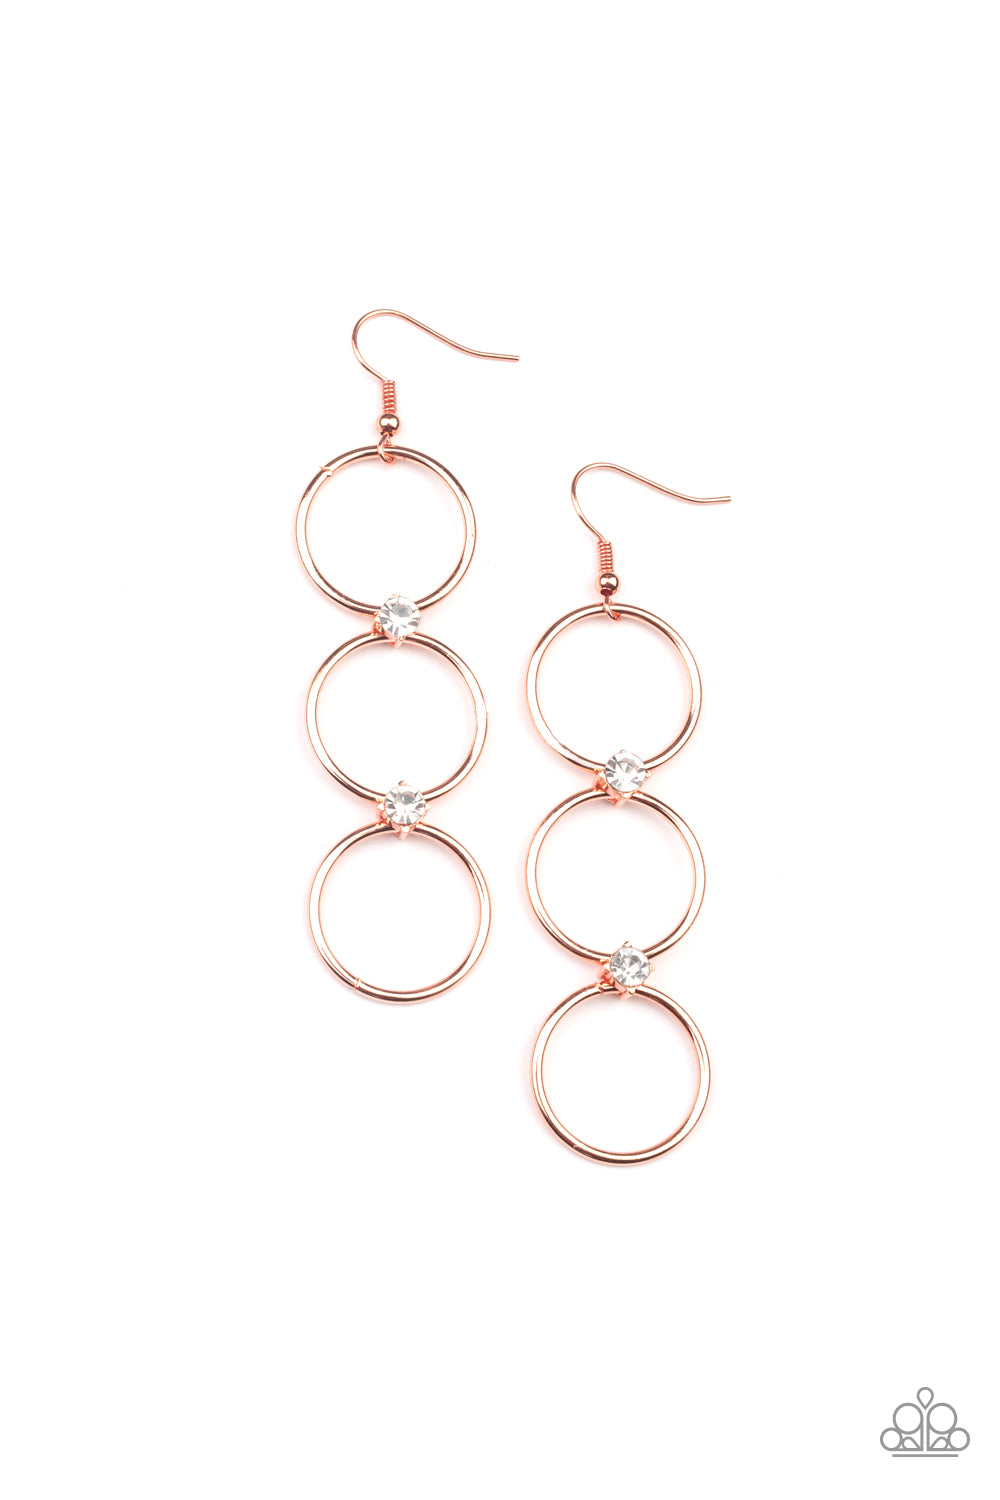 Paparazzi Accessories Refined Society - Copper Earrings - Lady T Accessories